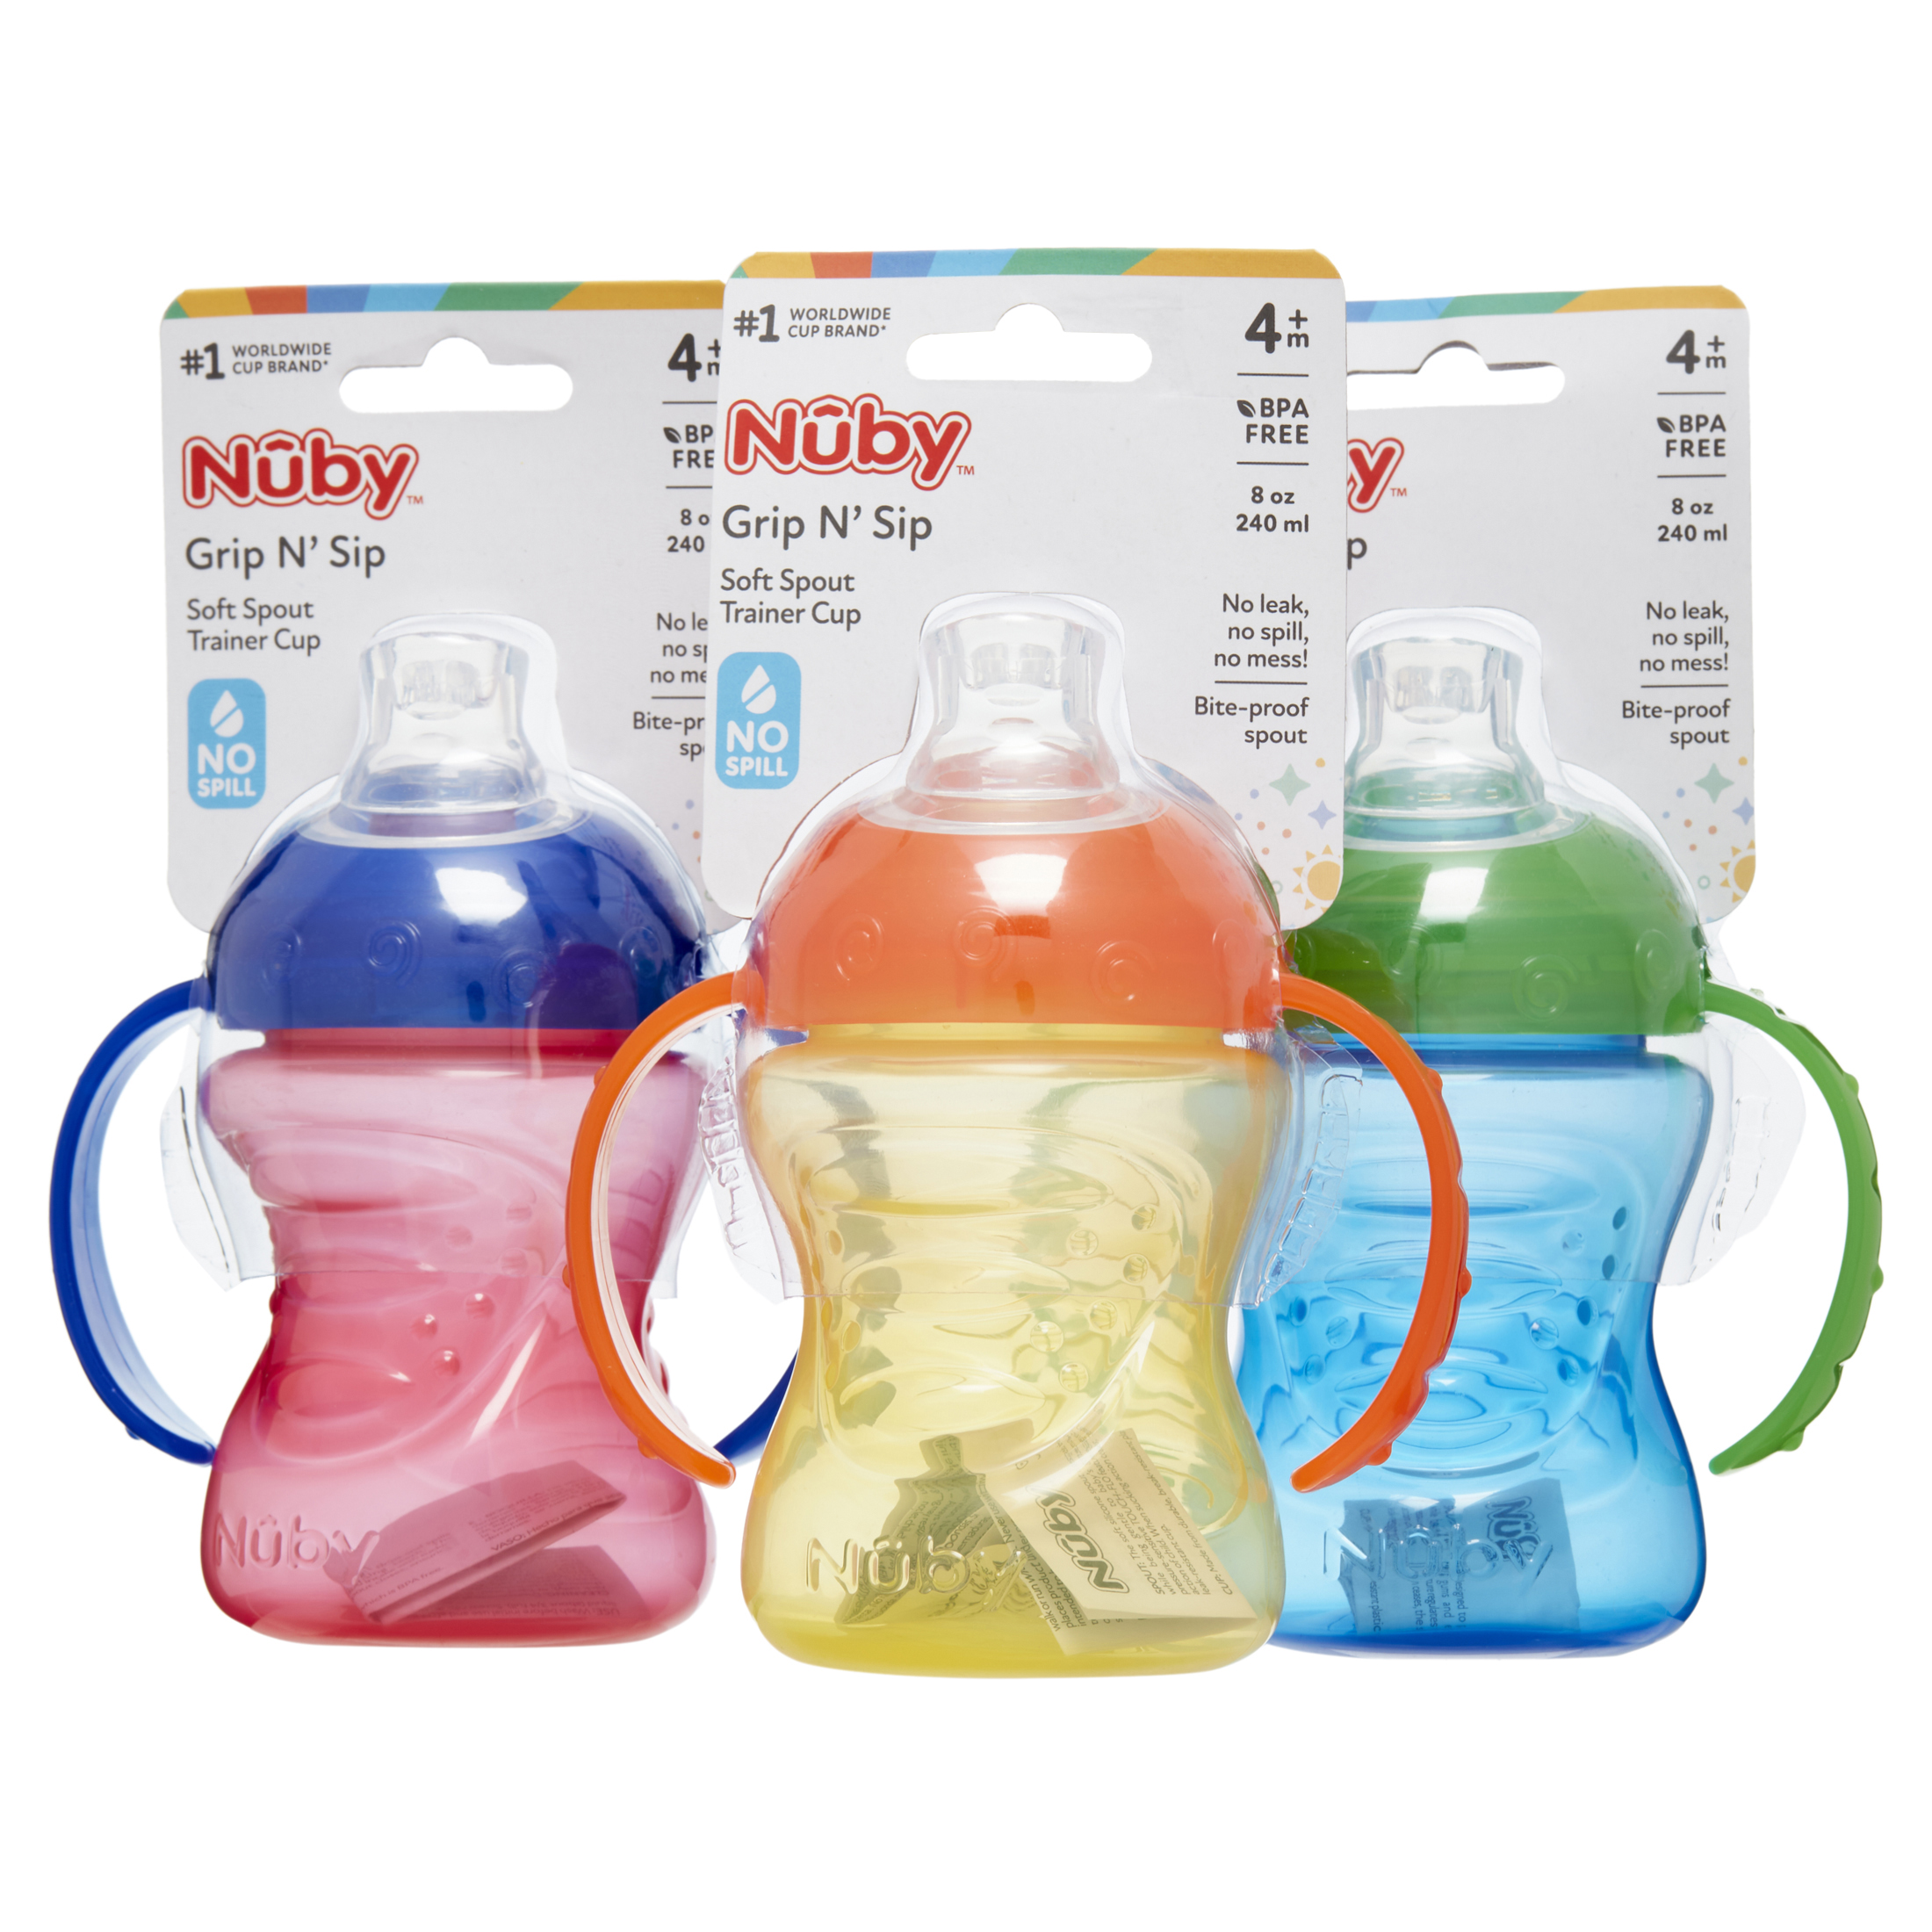 Nuby No-Spill Grip N' Sip Soft Spout Trainer Cup, 8 fl oz, 3 Count - image 1 of 10